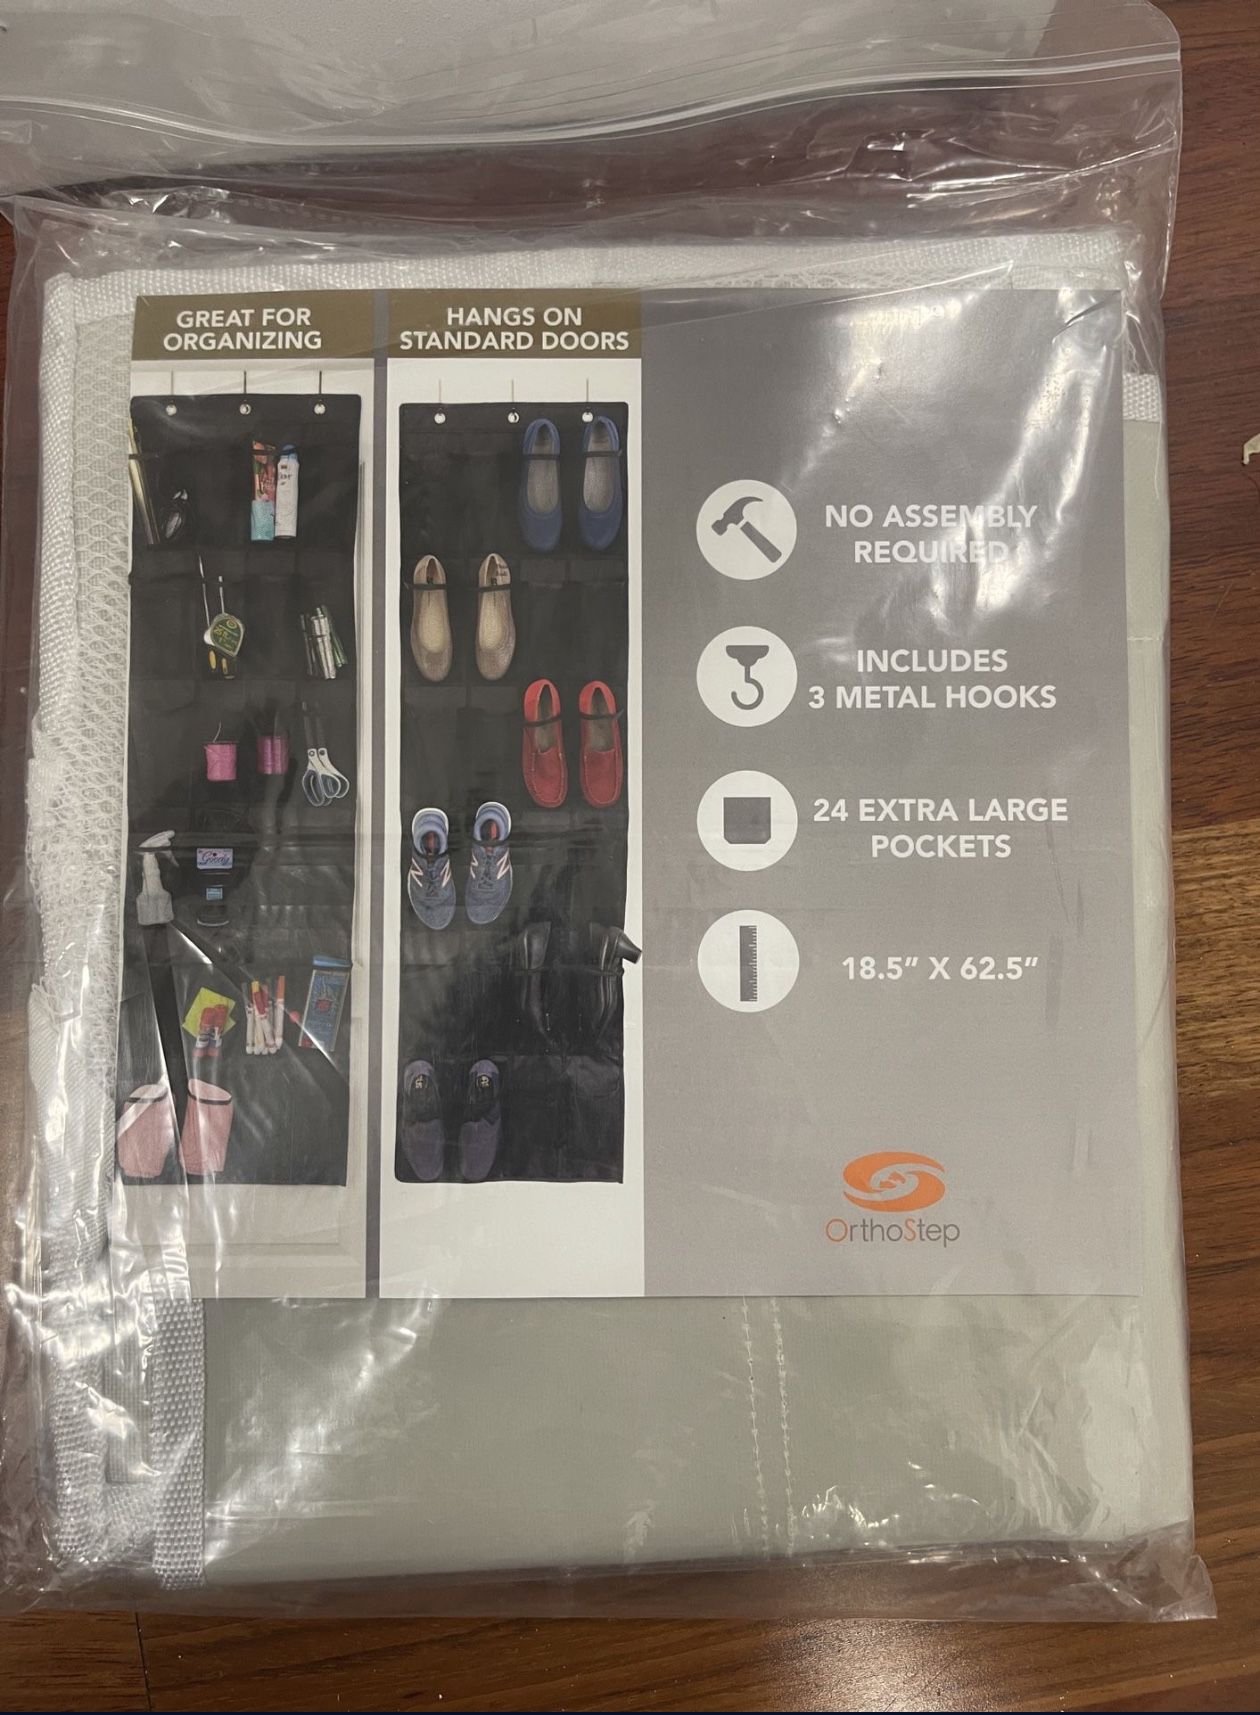 Brand New OrthoStep Organizer With Extra Deep Pockets For Shoes/Accessories